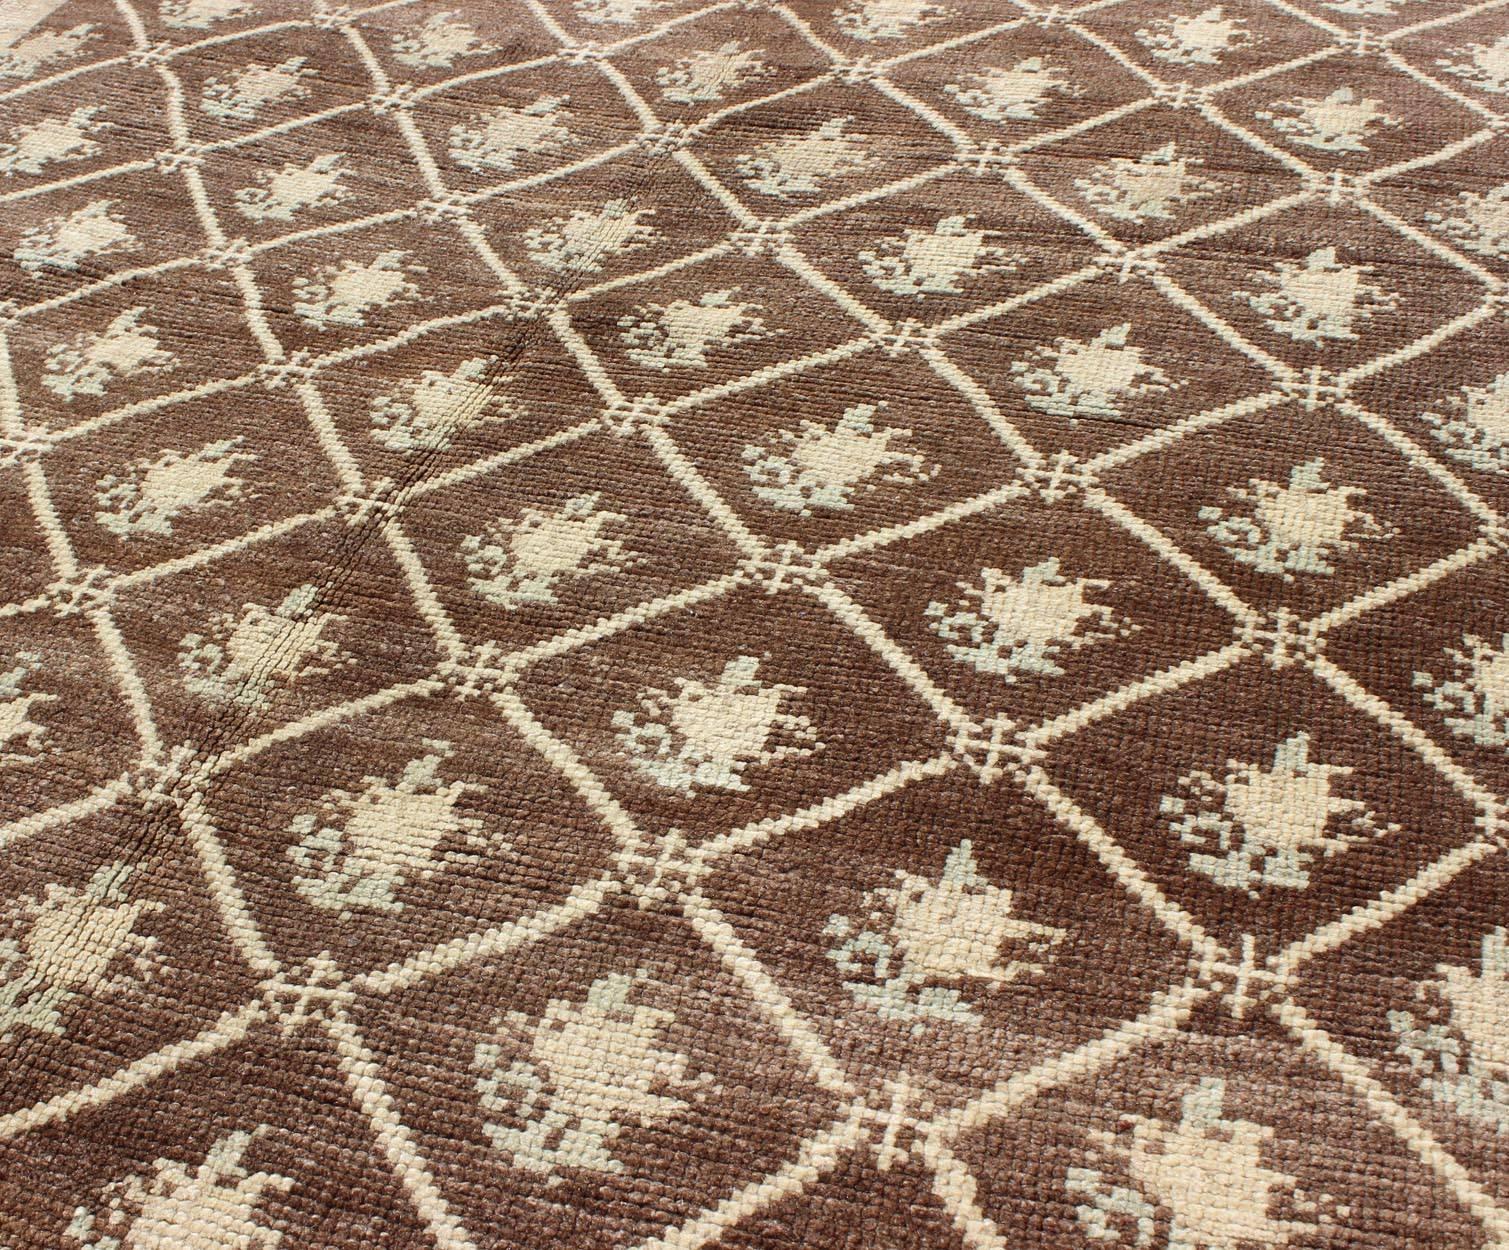 Oushak All-Over Design Turkish Tulu Carpet in Shades of Brown and Cream For Sale